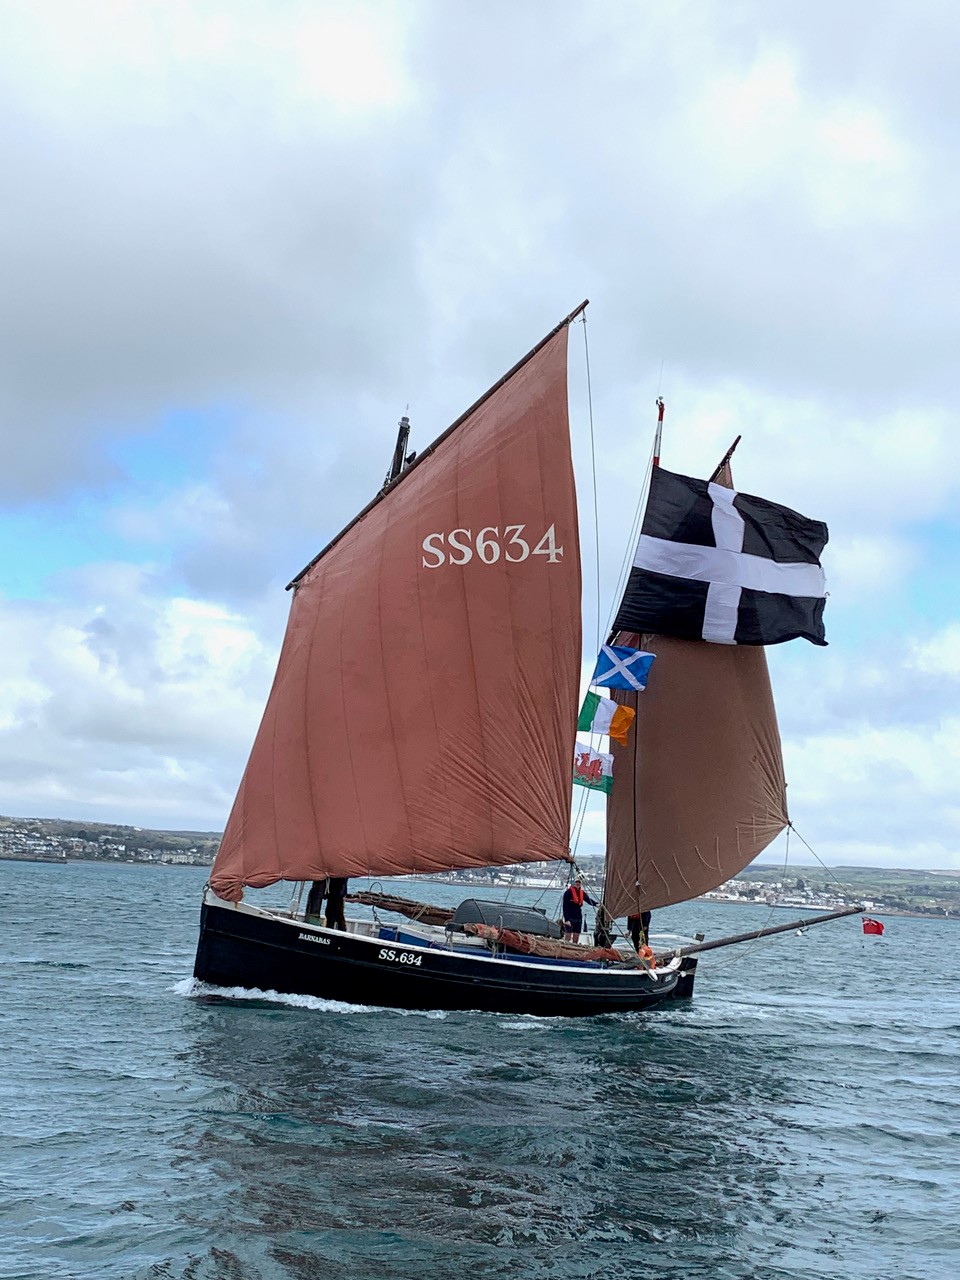 Barnabas departing from Newlyn. Credit: Cornish Maritime Trust